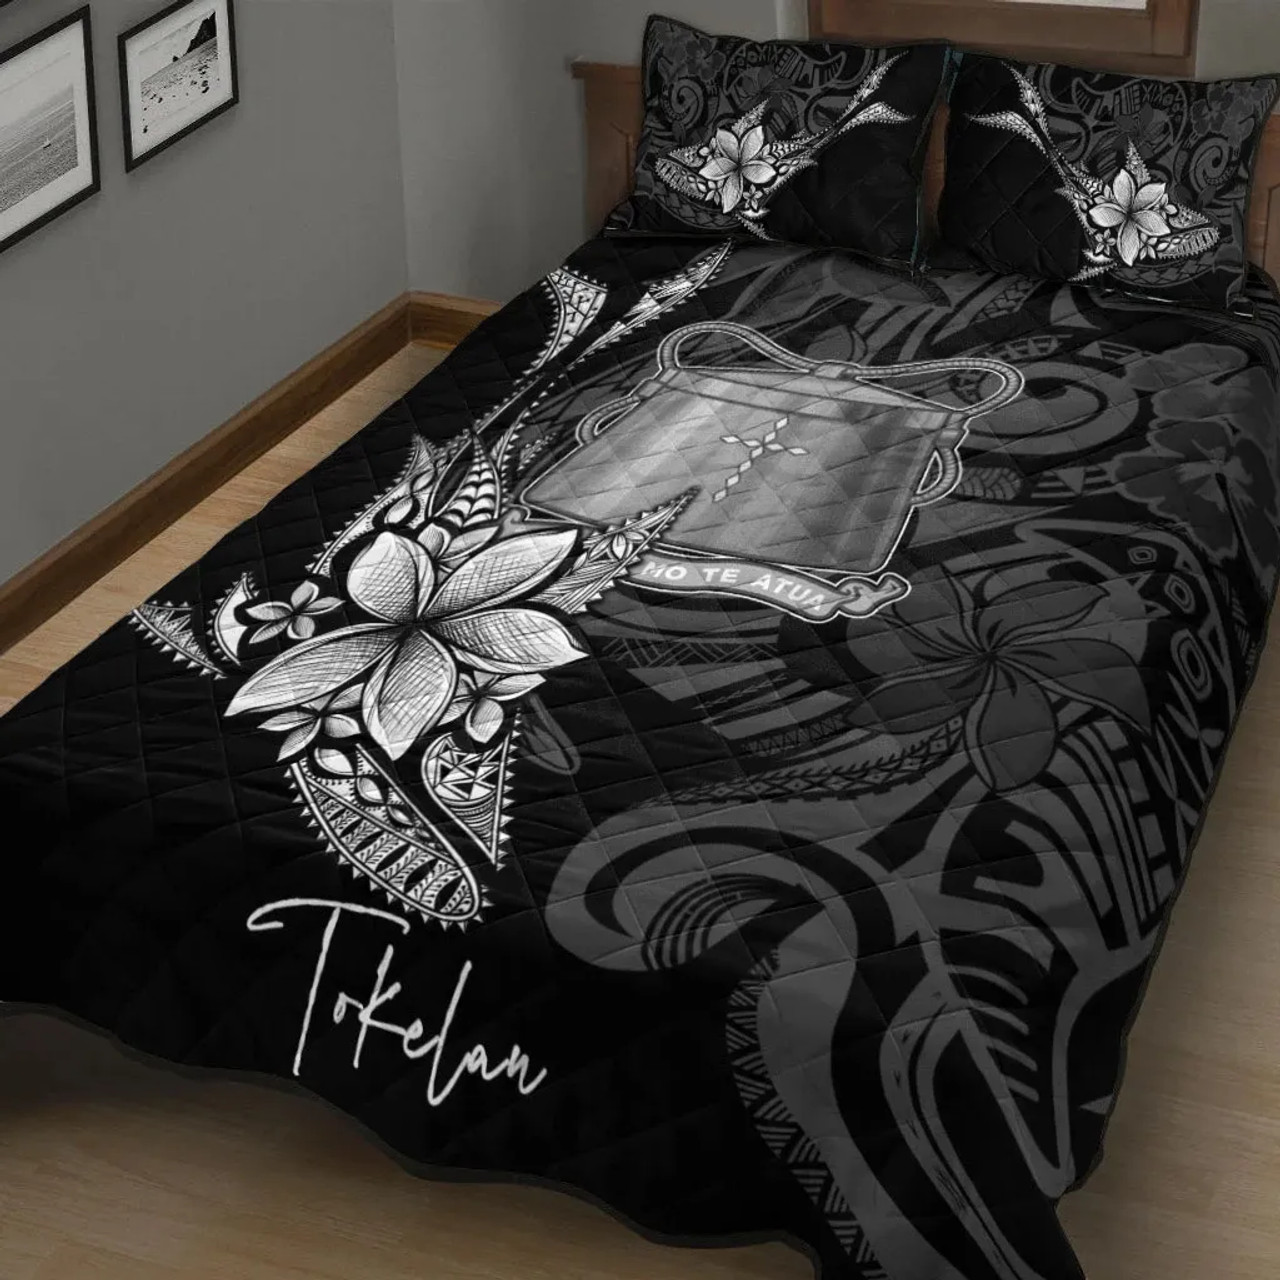 Tokelau Quilt Bed Set - Fish With Plumeria Flowers Style 1